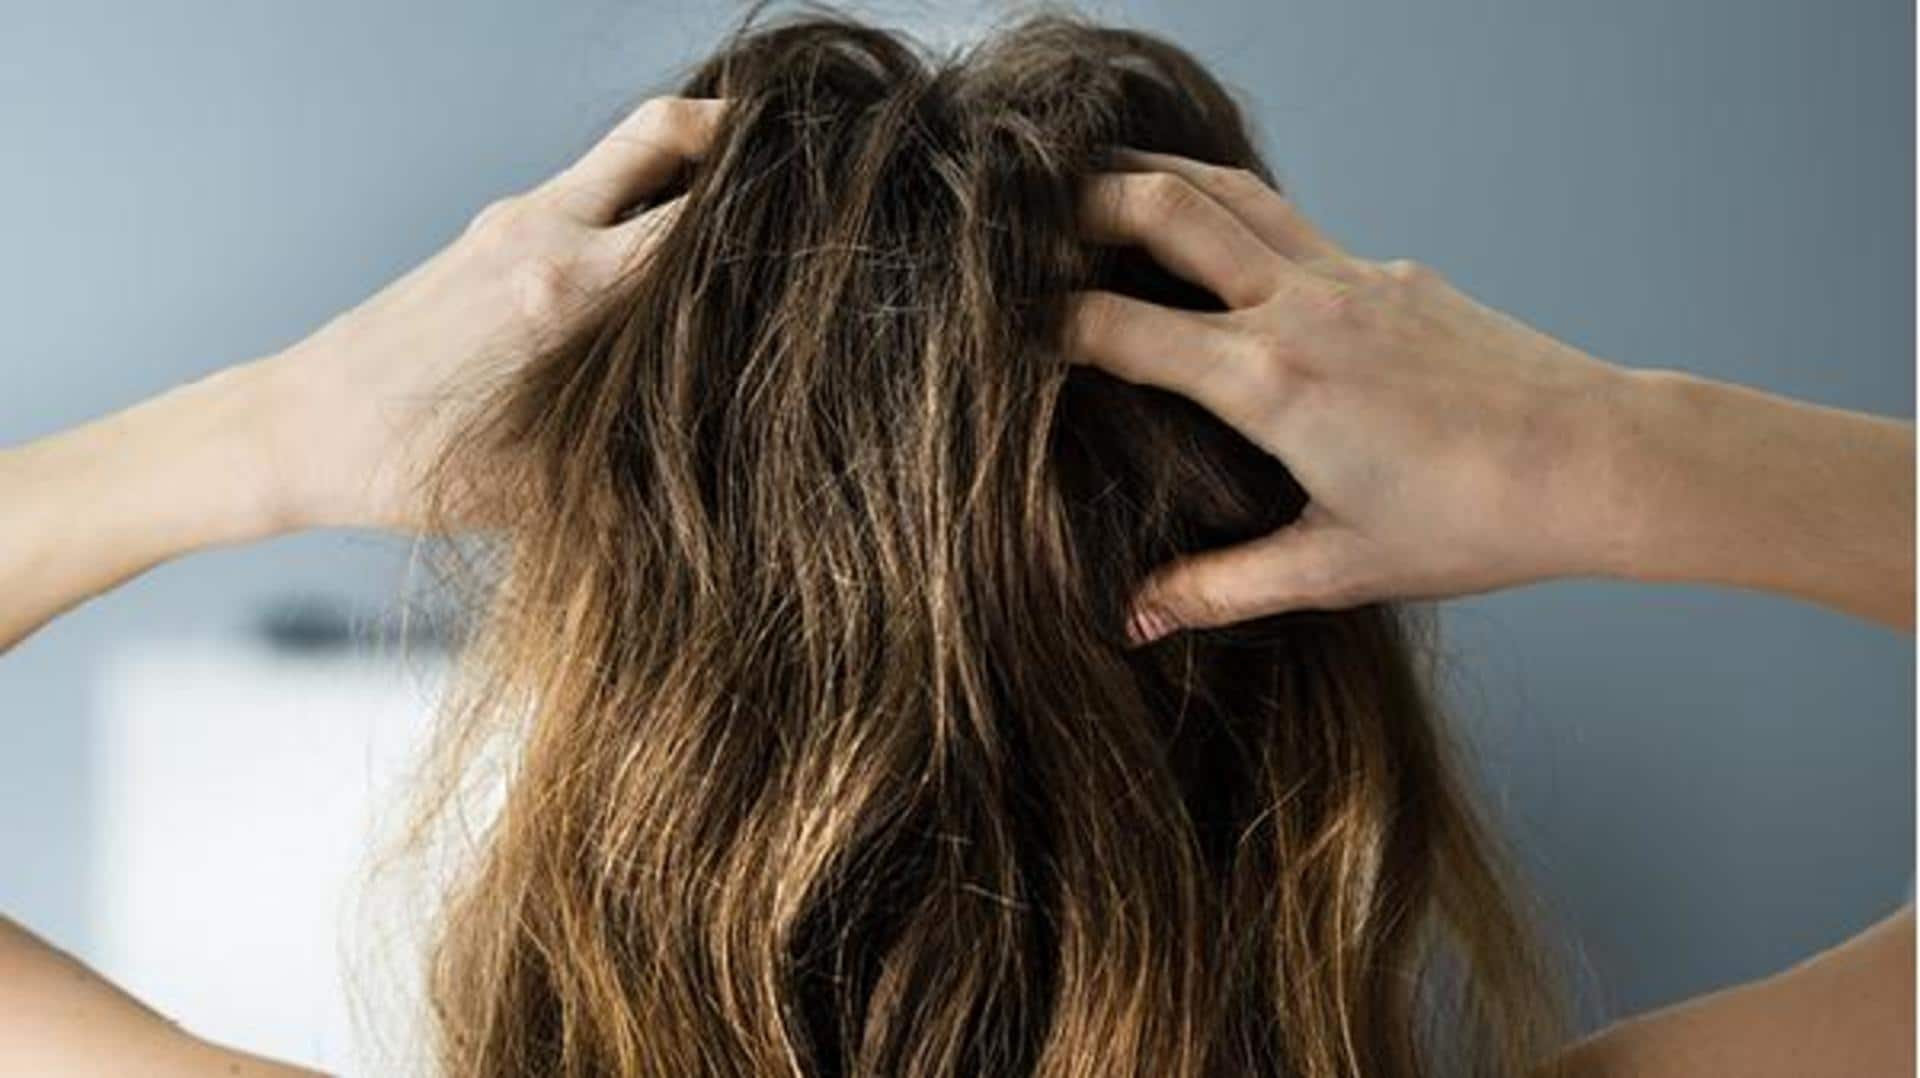 Try these natural homemade remedies for dry scalp